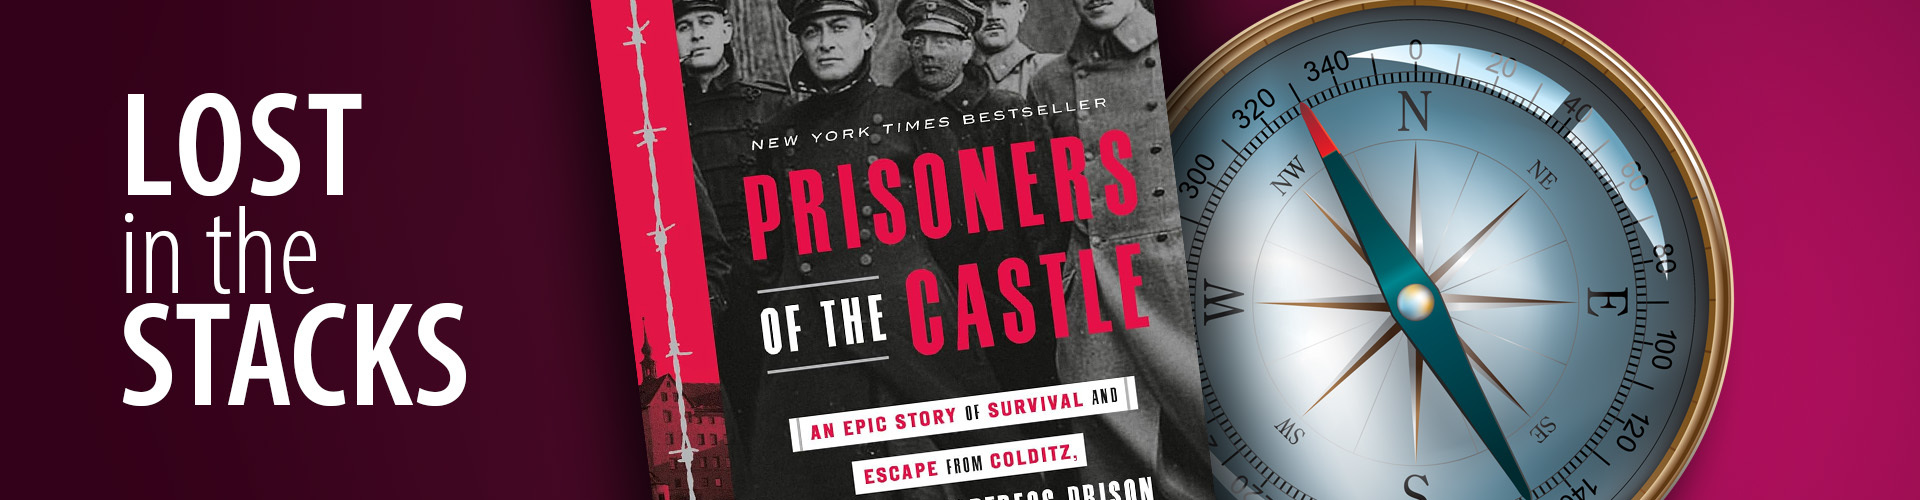 prisoners of the castle featured 1920x500